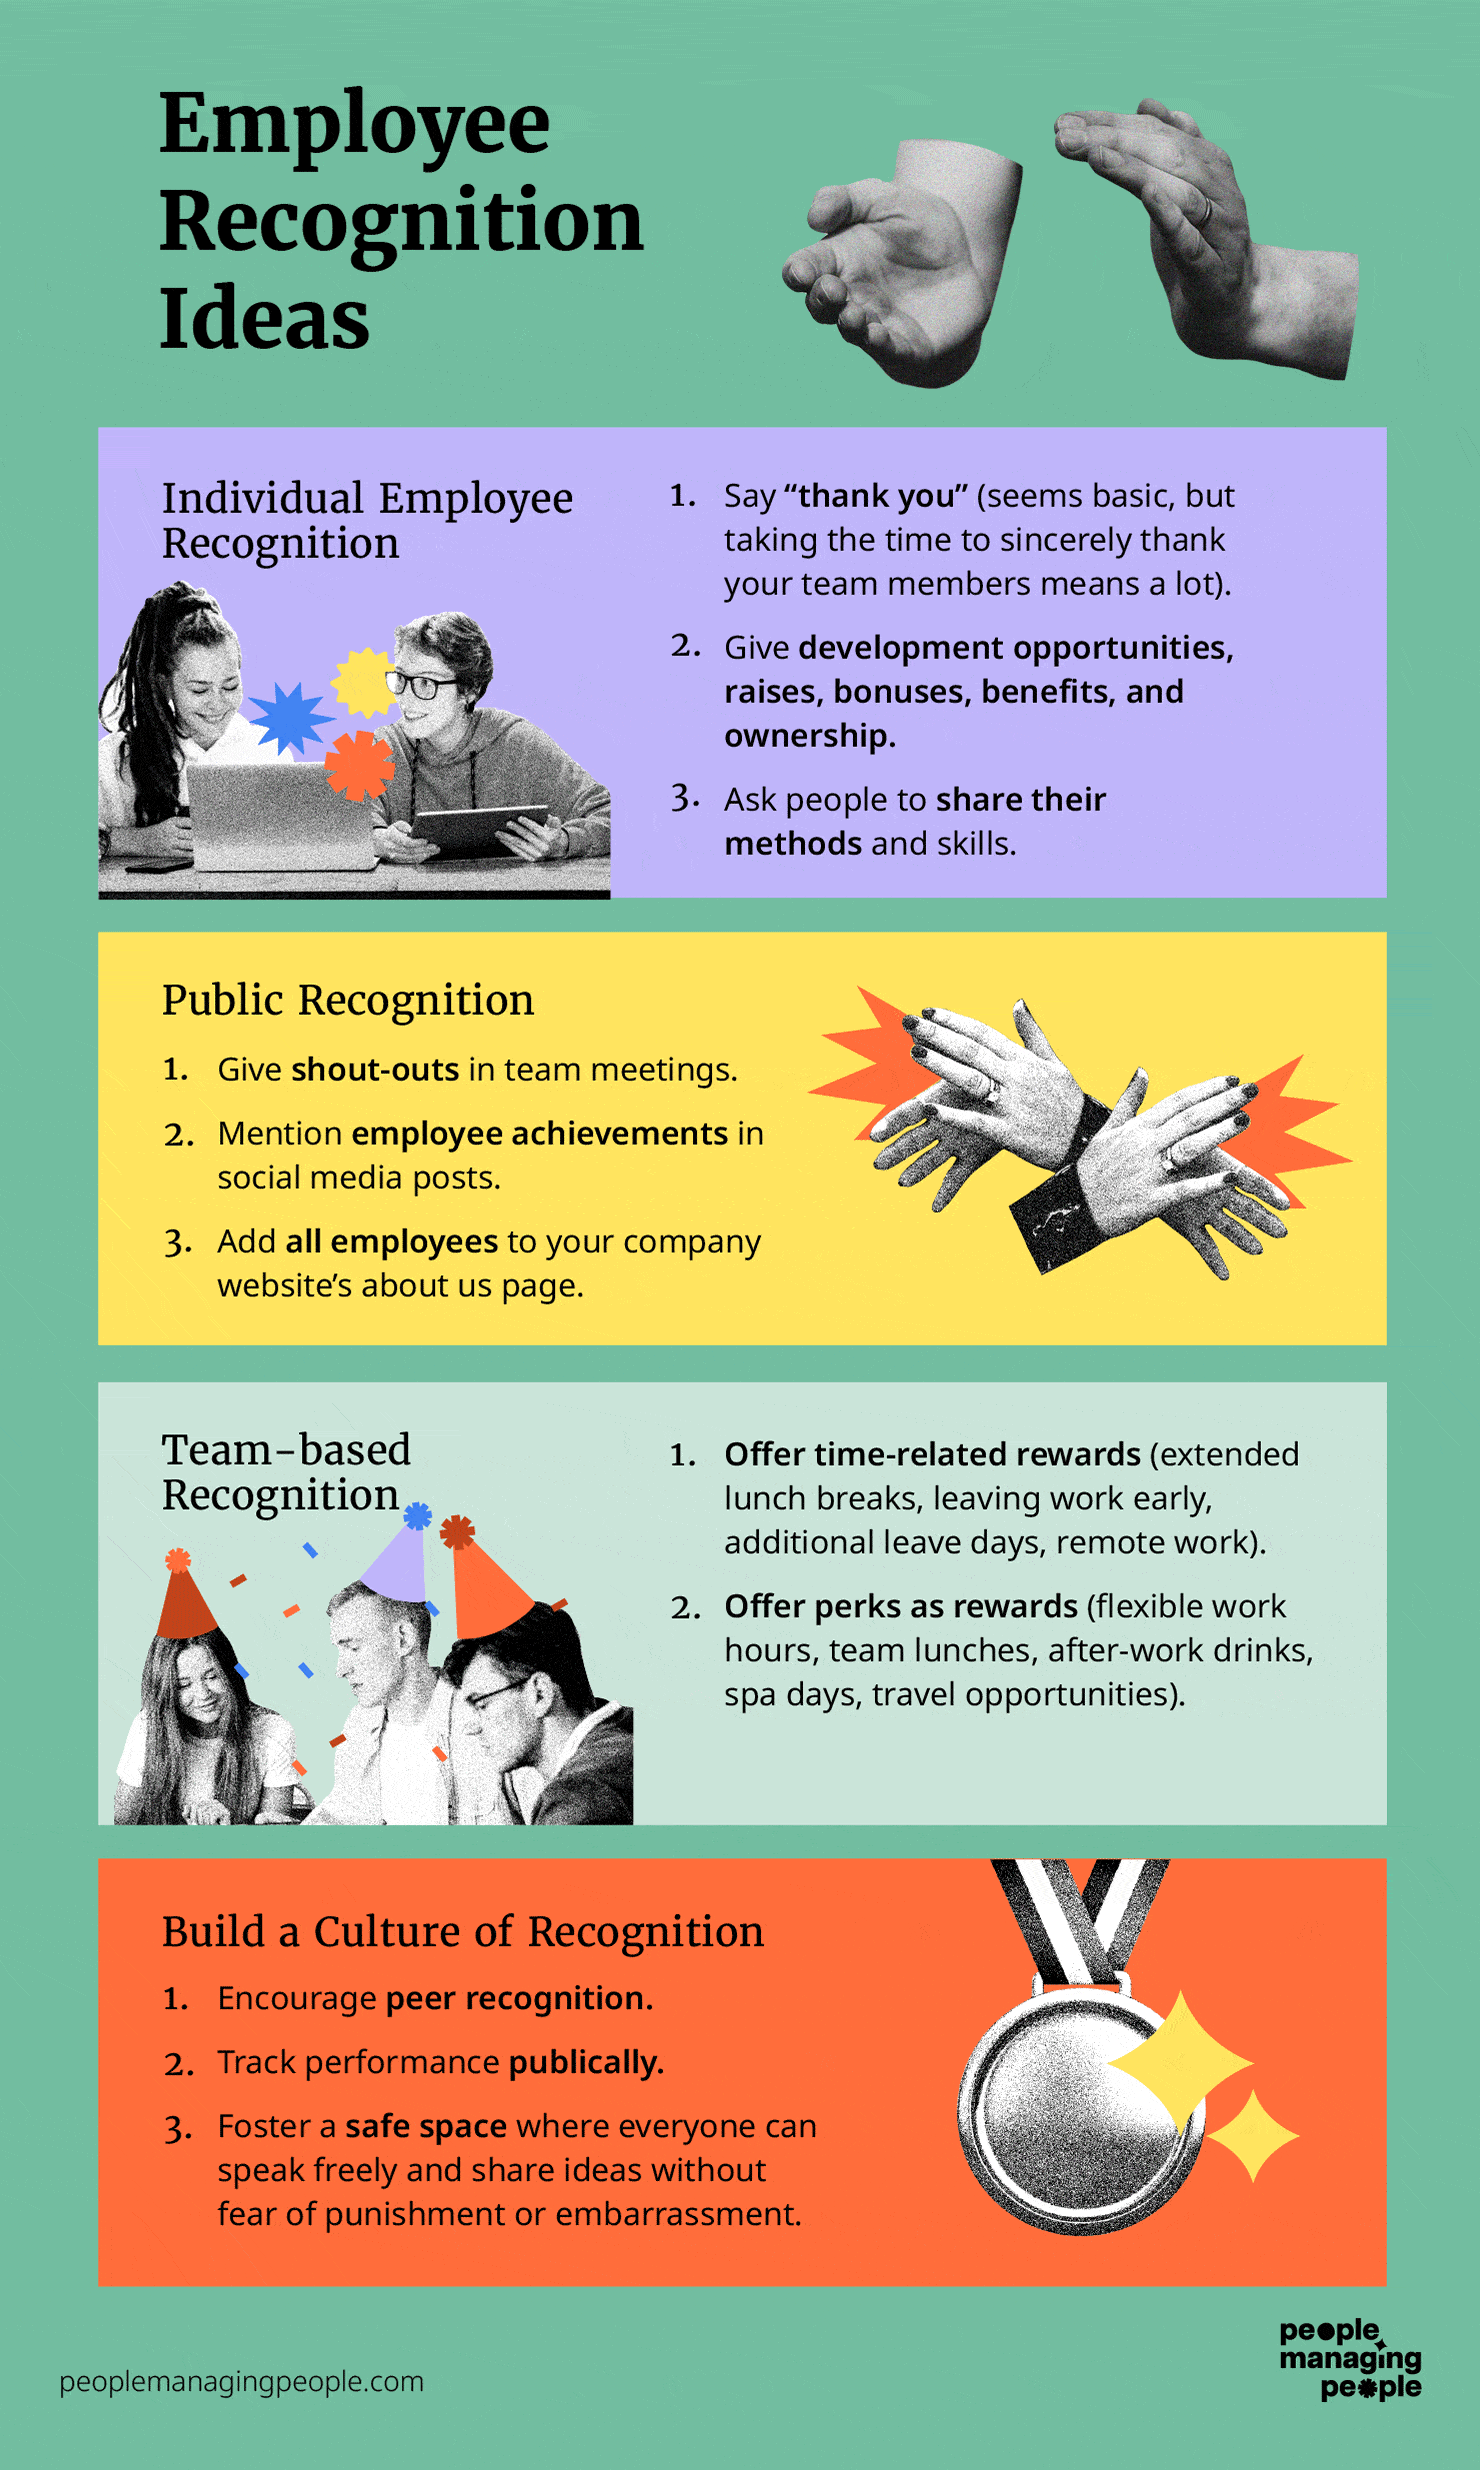 Infographic with individual employee recognition, public recognition, and team-based recognition ideas and how to build a culture of recognition.